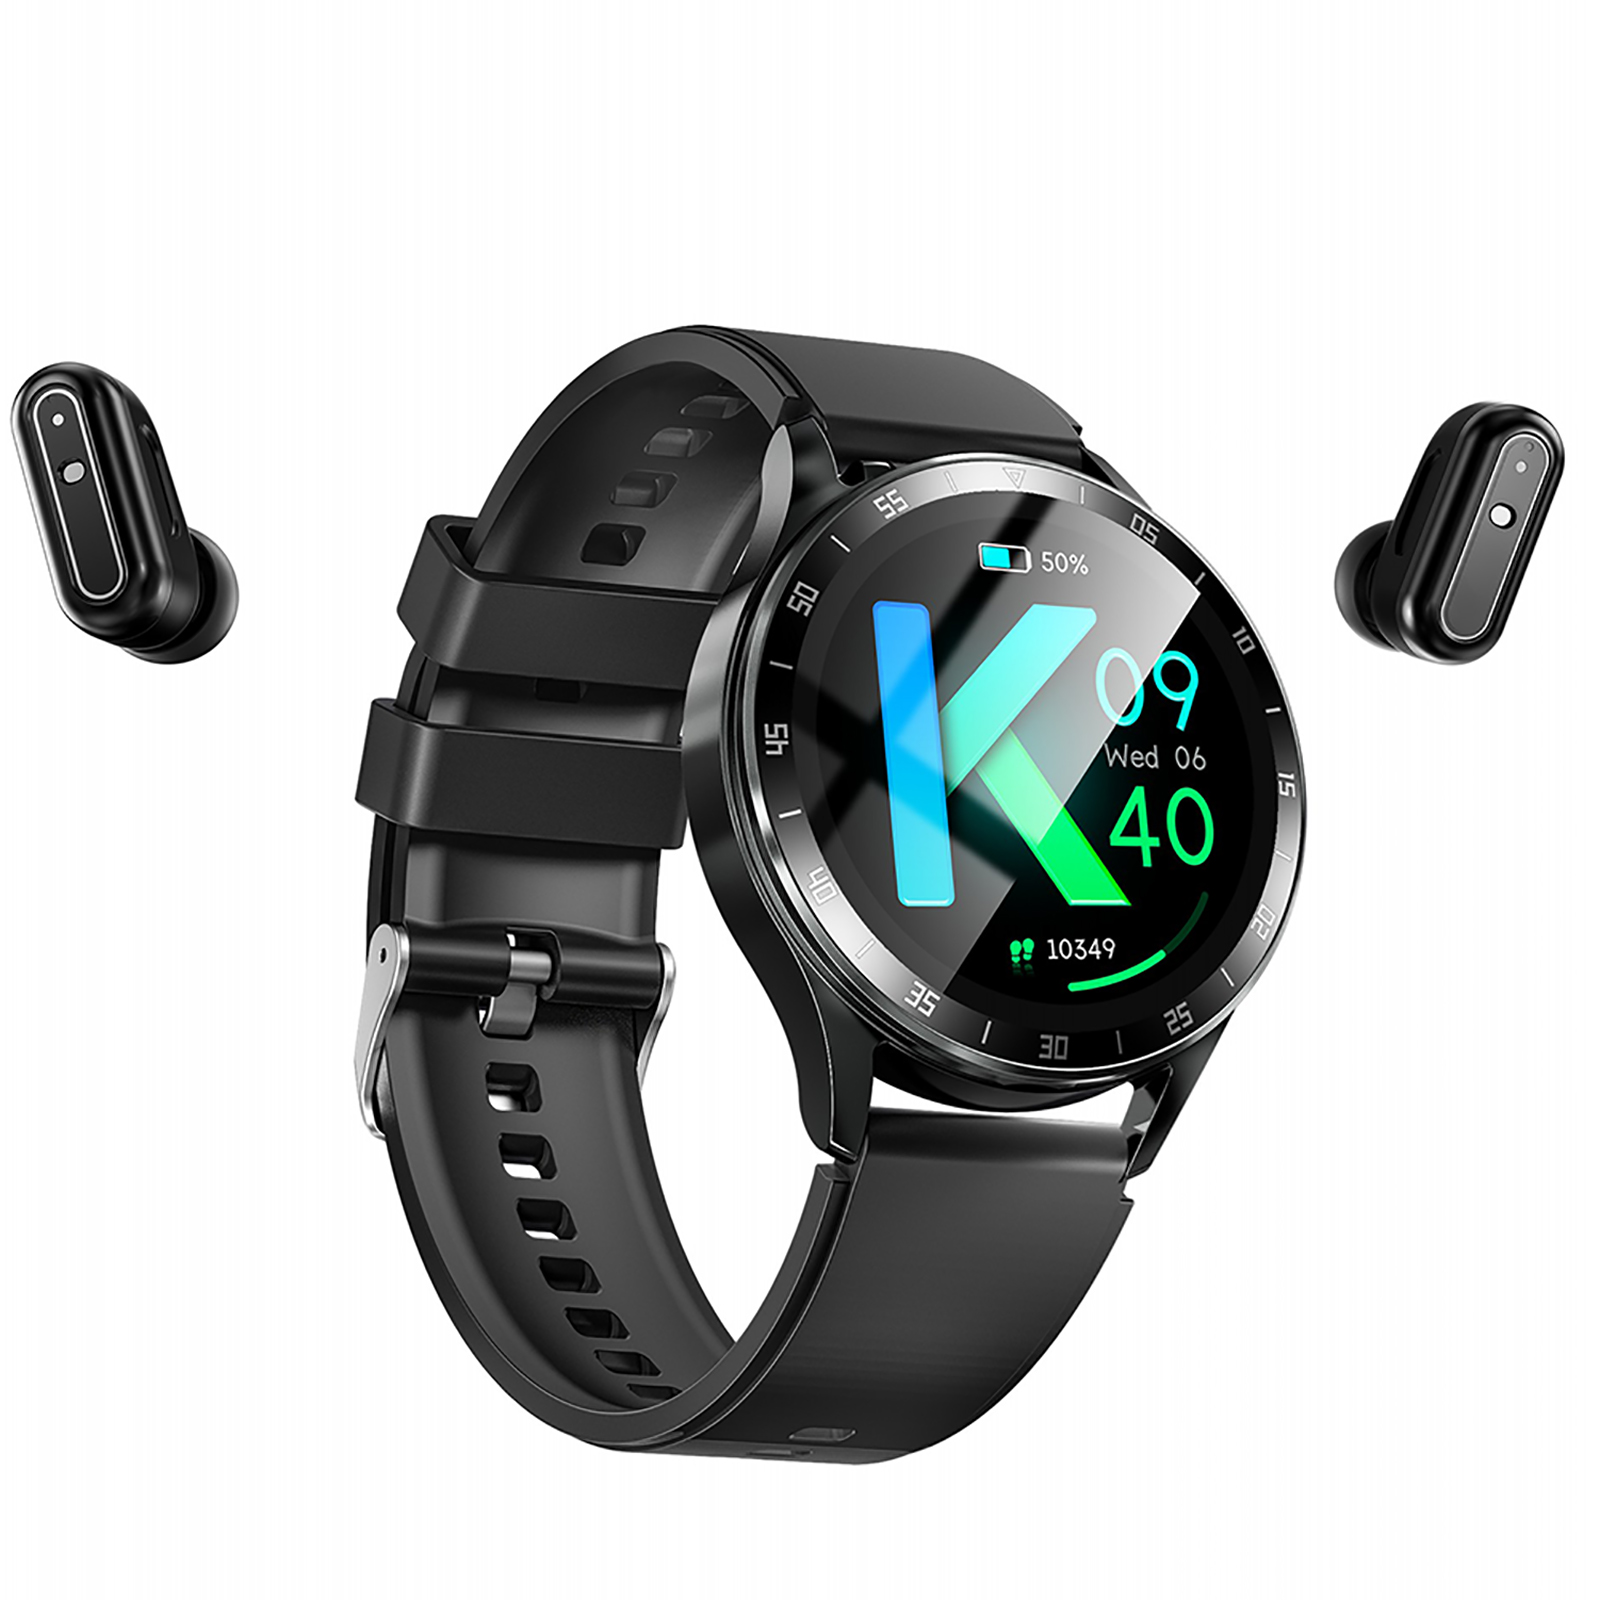 X10 2 In 1 Smart Watch with Earbuds IP67 Waterproof Fitness Tracker with Heart Rate Monitoring Watches with Earbuds Black